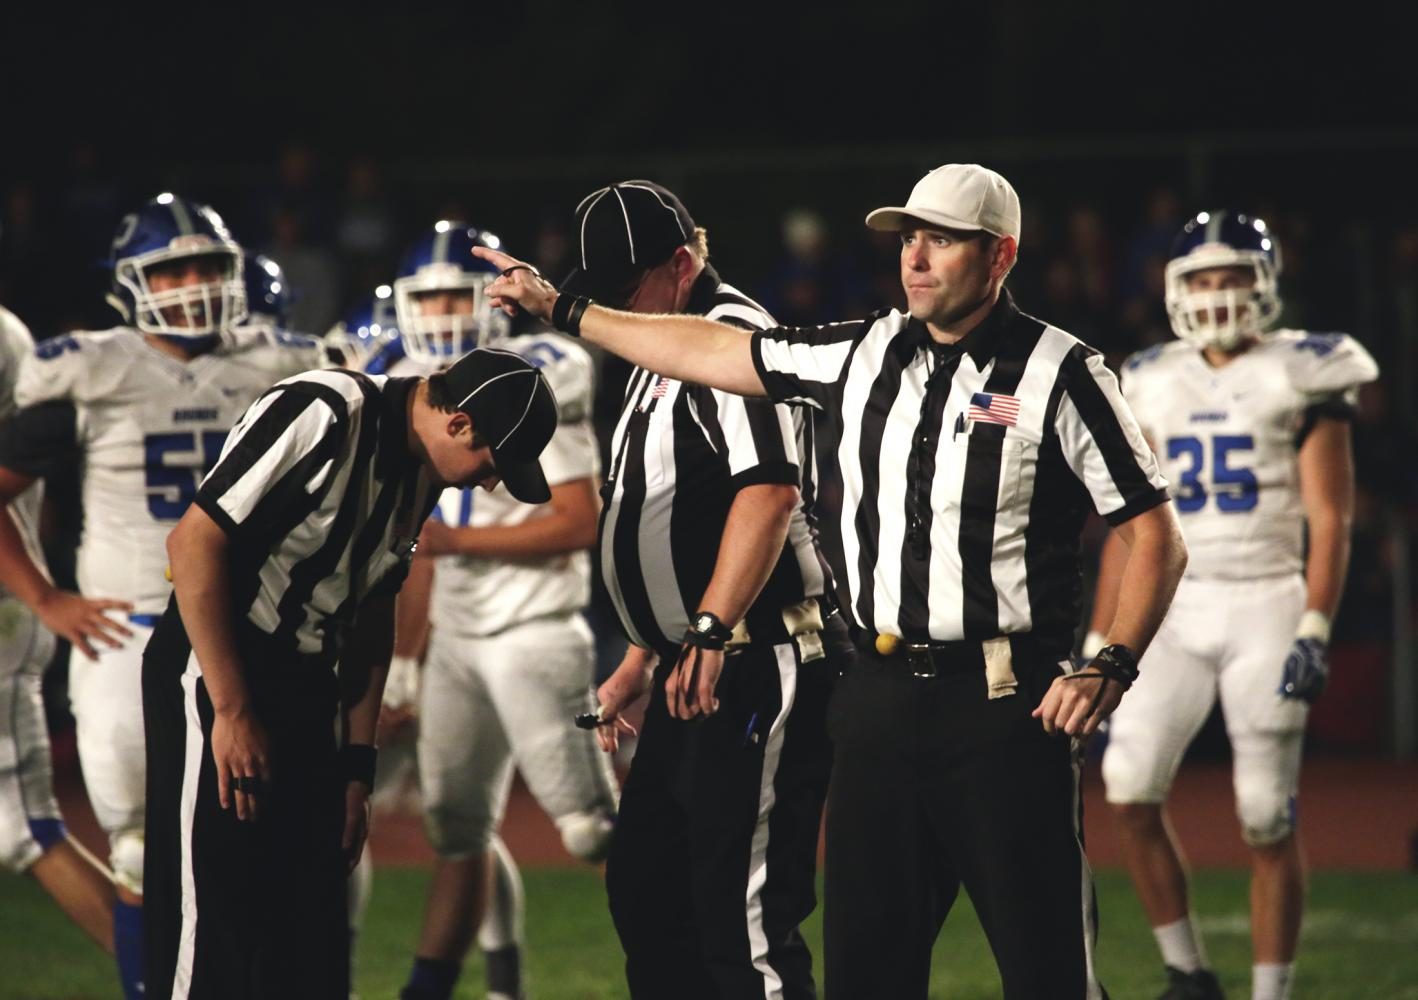 Referees+come+together+for+a+flag+in+a+Pullman+High+School+football+game.